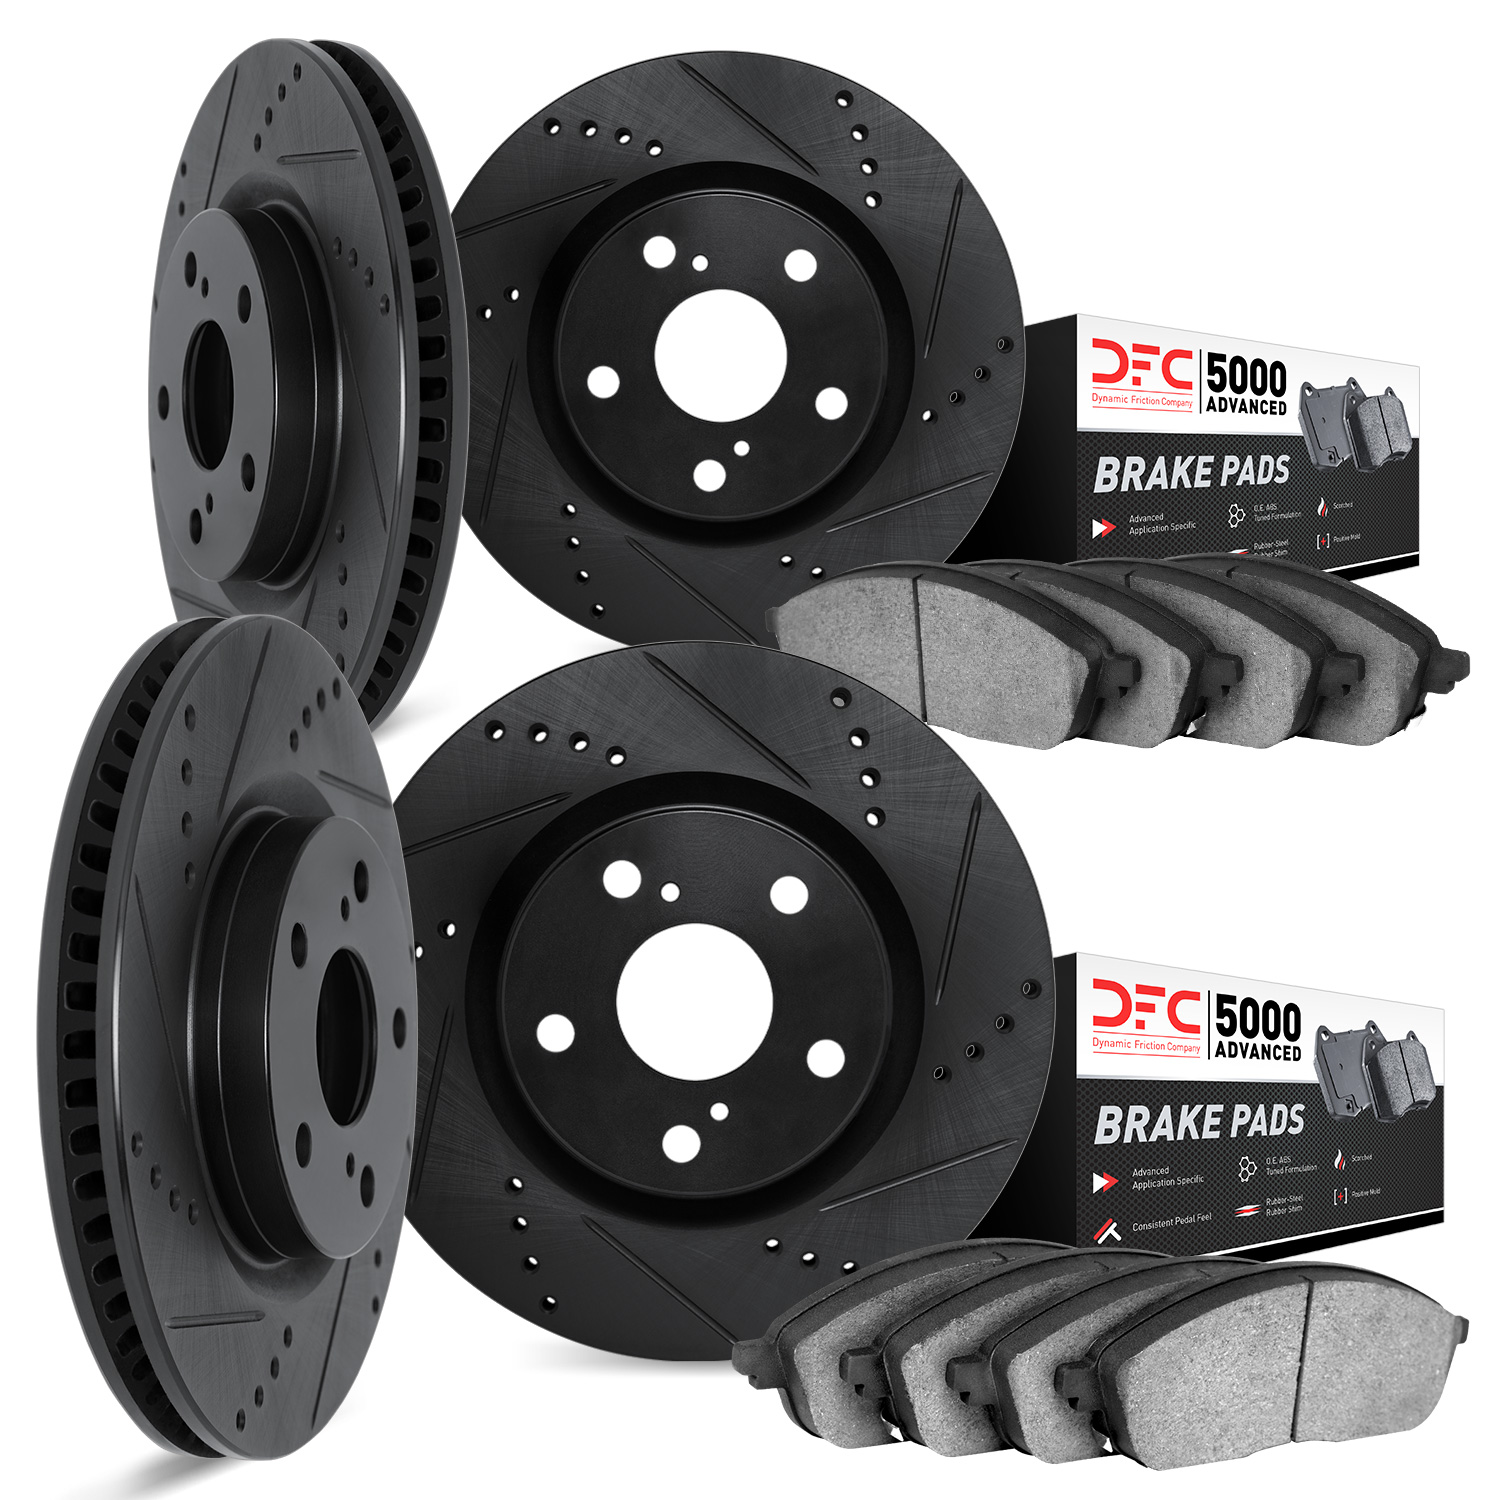 8504-13016 Drilled/Slotted Brake Rotors w/5000 Advanced Brake Pads Kit [Black], 2016-2019 Subaru, Position: Front and Rear